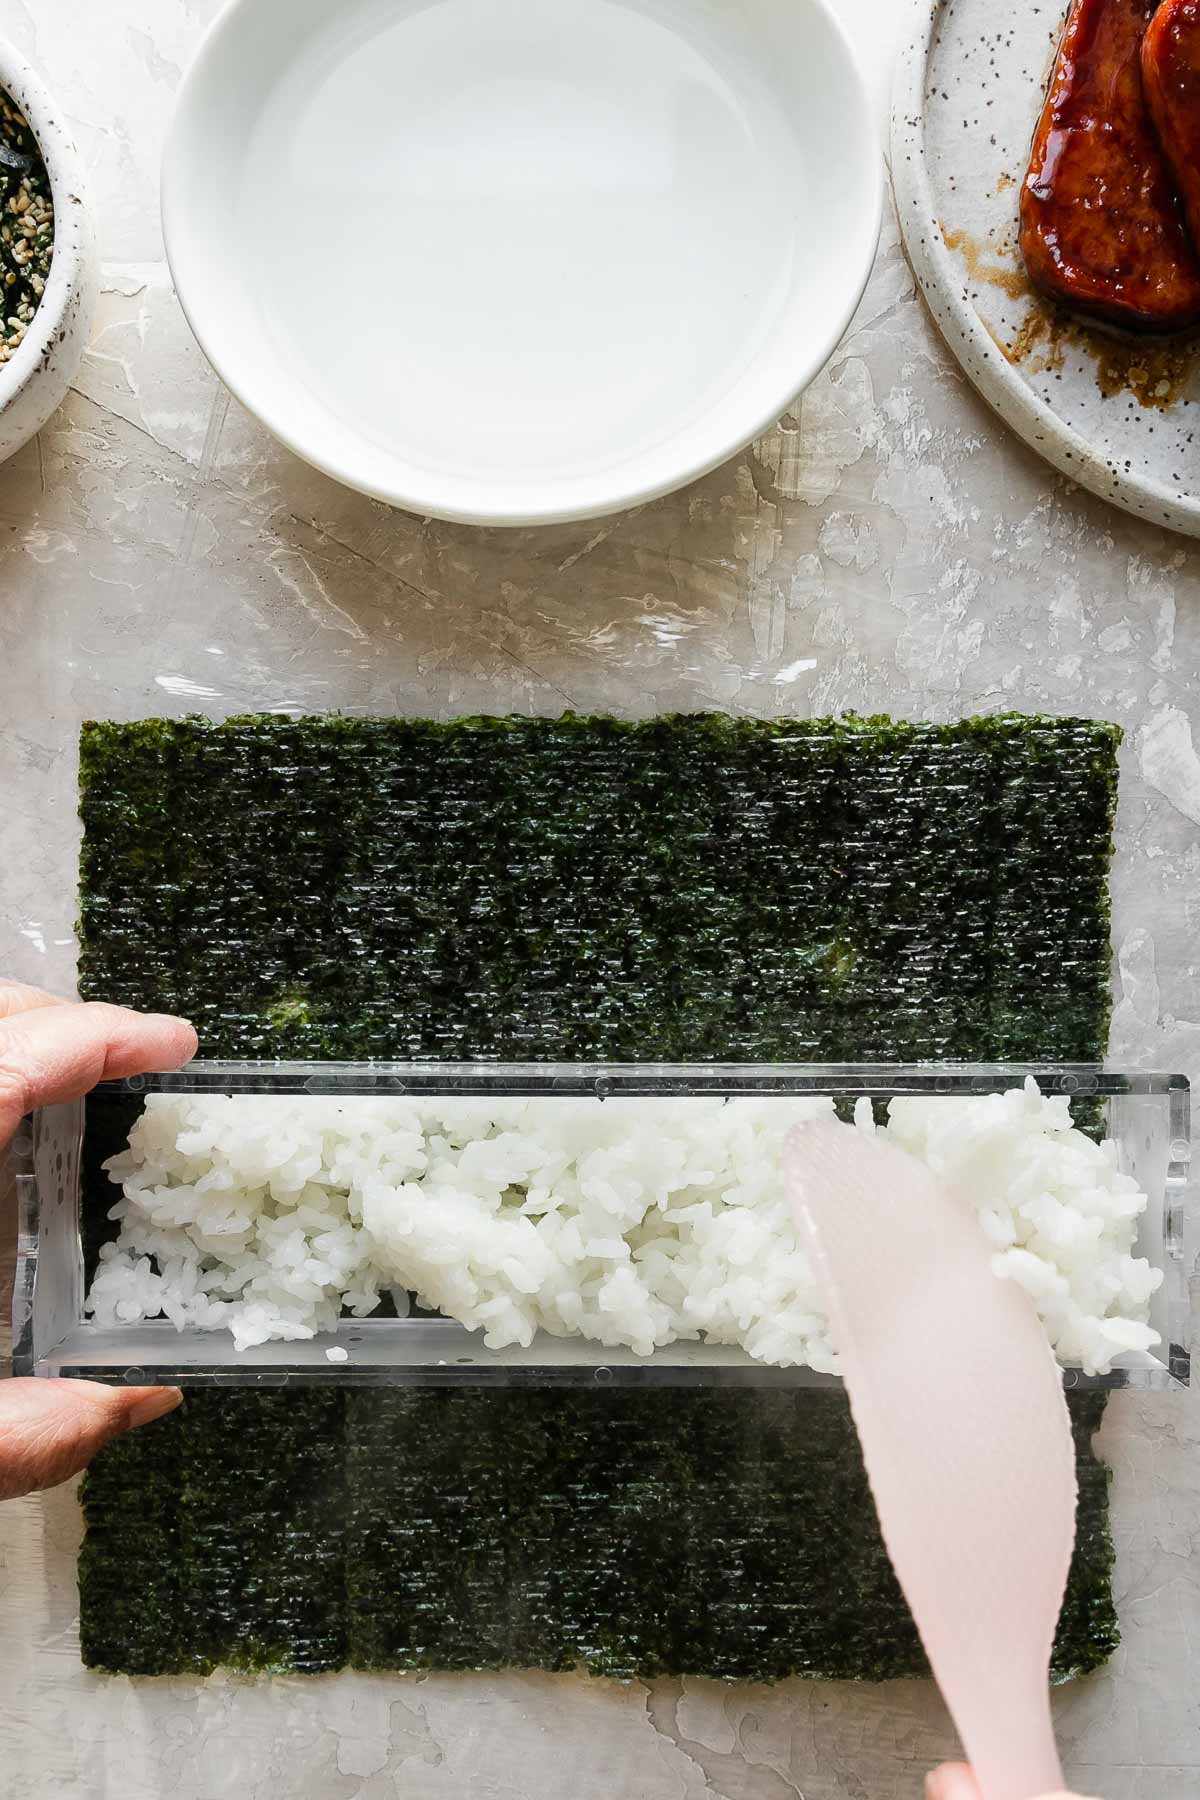 How to make Hawaiian spam musubi, step 5: Build the spam musubi. A close up of a woman's hands work to fill the outer box of a double musubi mold that rests atop a single sheet of sushi nori arranged on a piece of plastic wrap atop a creamy white textured surface. The woman stablizes the musubi mold with one hand while she uses a rice paddle in the other to gently add a layer of cooked rice to the inside of the mold. Resting above the nori & the musubi mold is a small bowl filled with furikake seasoning with a spoon resting inside, another small white bowl filled with water, and a small speckled ceramic plate with pan-fried teriyaki Spam.